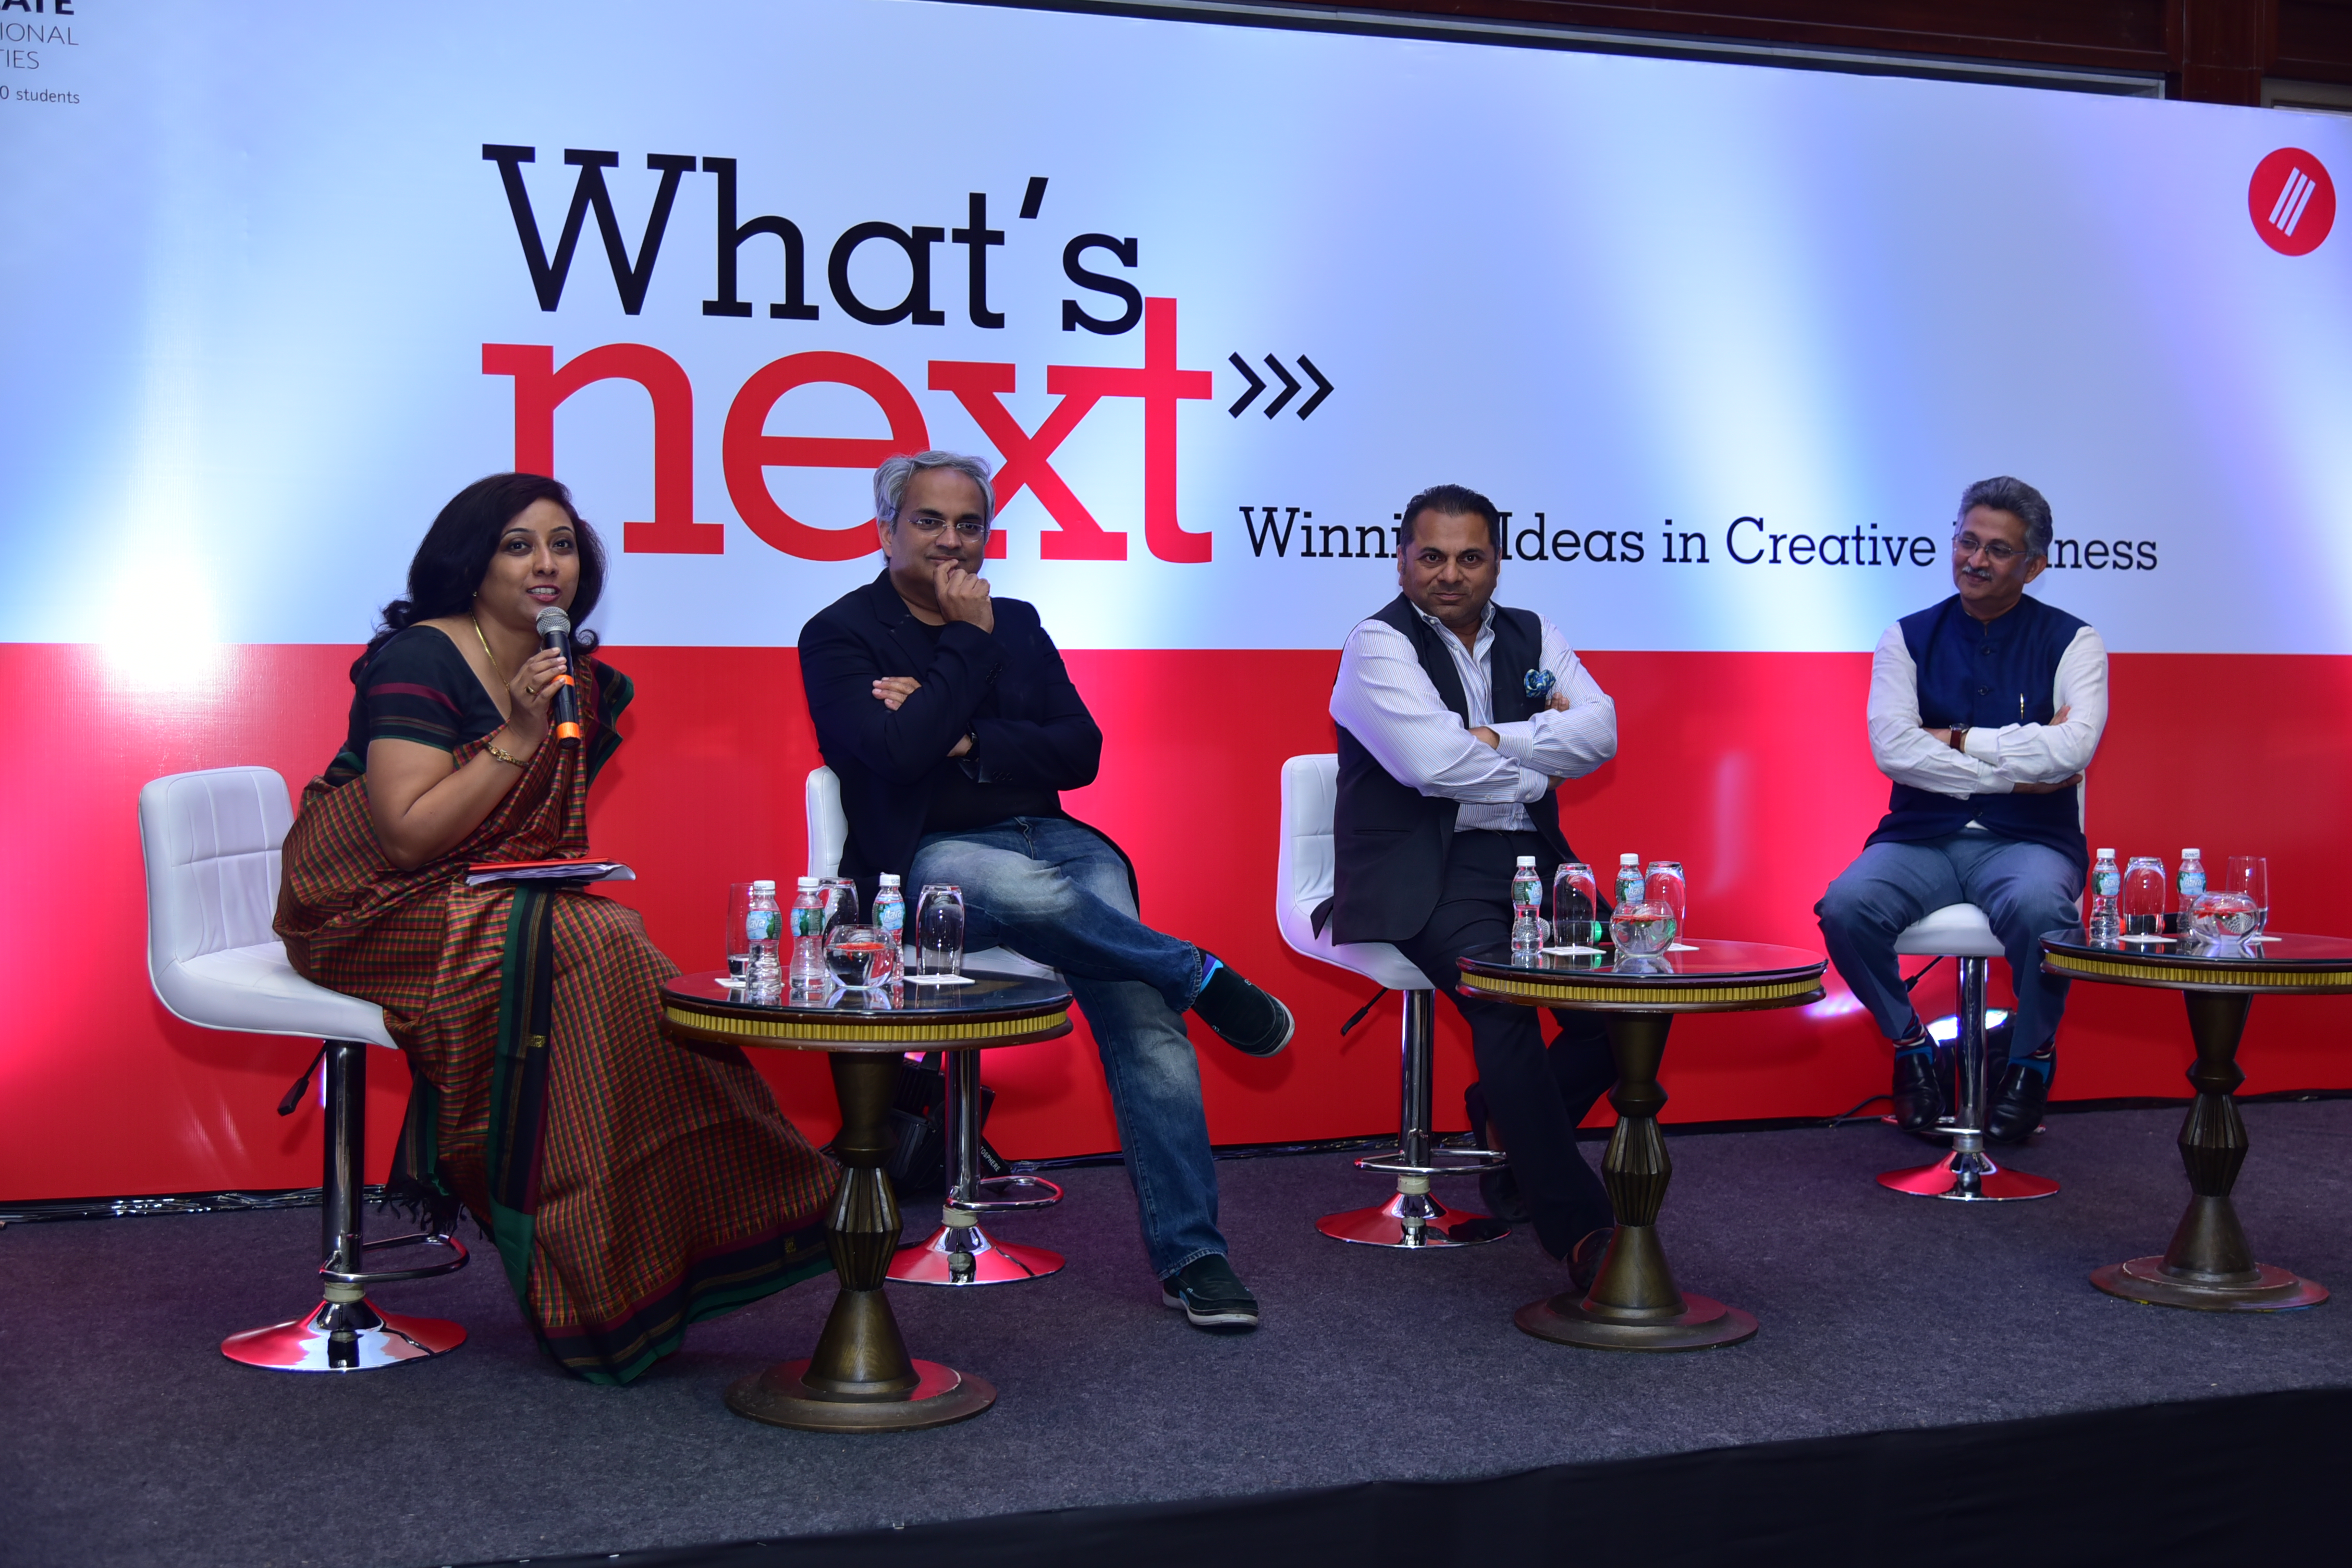 Let’s explore the winning ideas in Creative Business with “What’s Next”